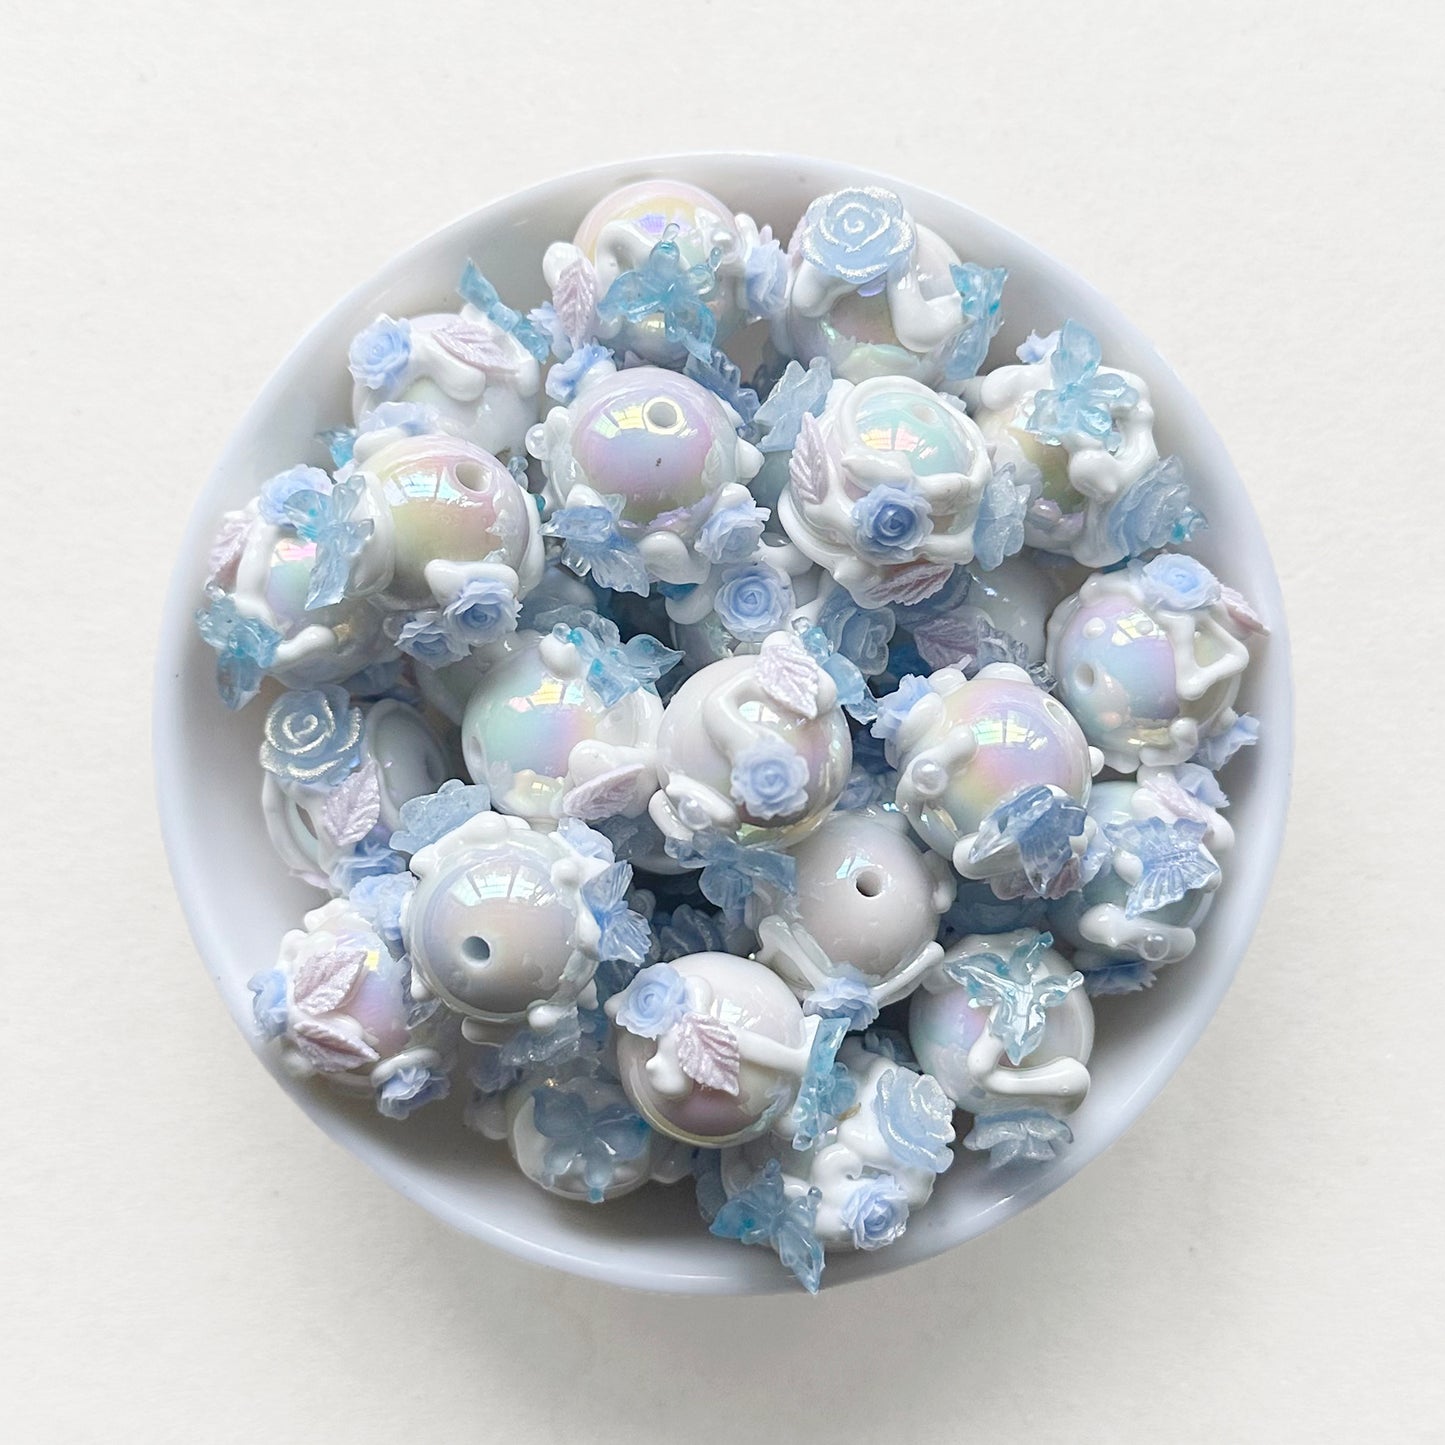 10pcs/Lot Fancy Acrylic Beads, Mix Floral Beads, Gumball Beads